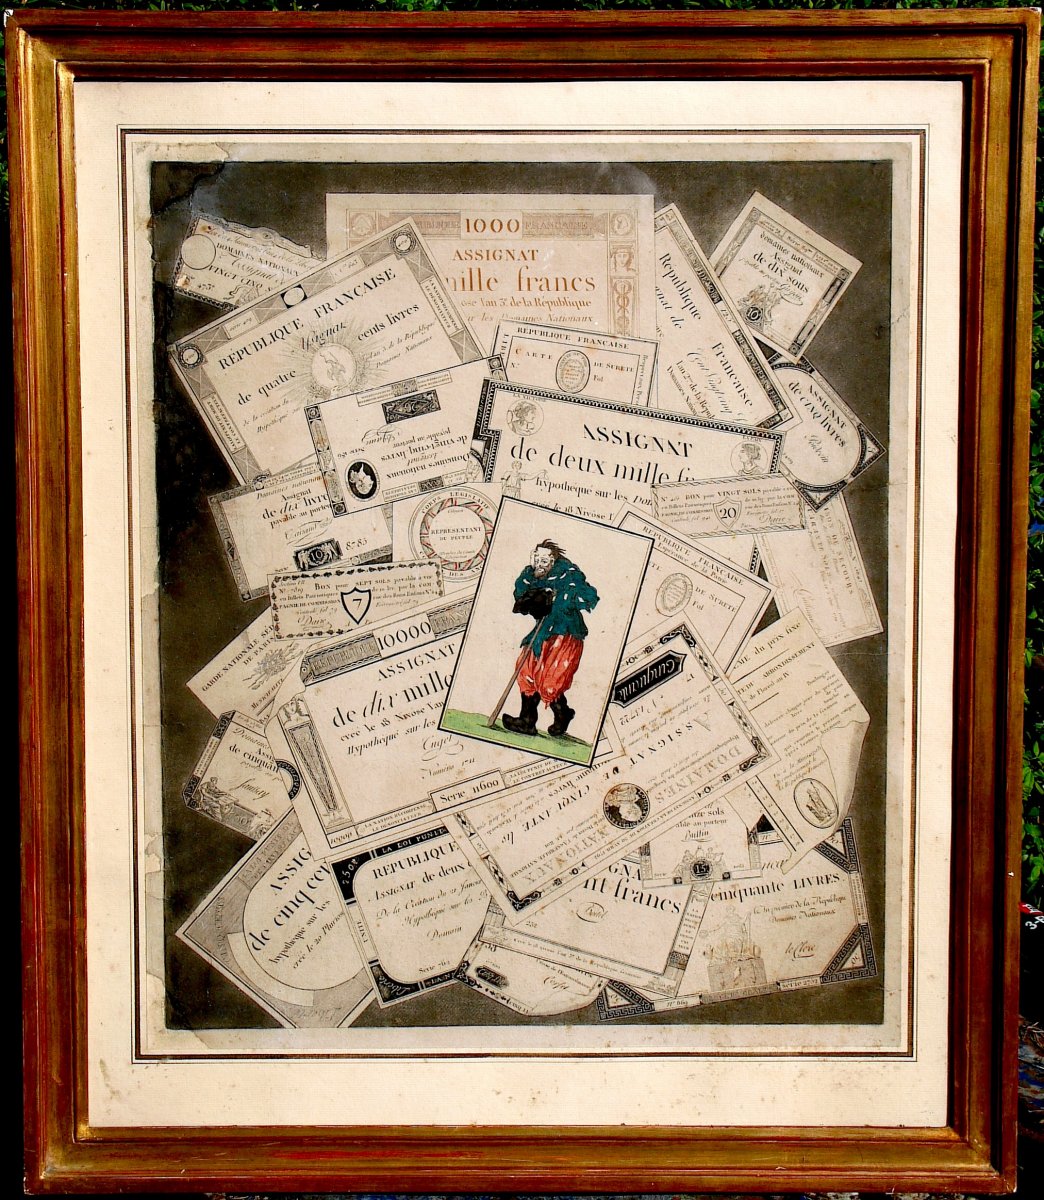 Year 3. Assignats - Engraving Representing Assignats Tickets In Trompe-l'oeil